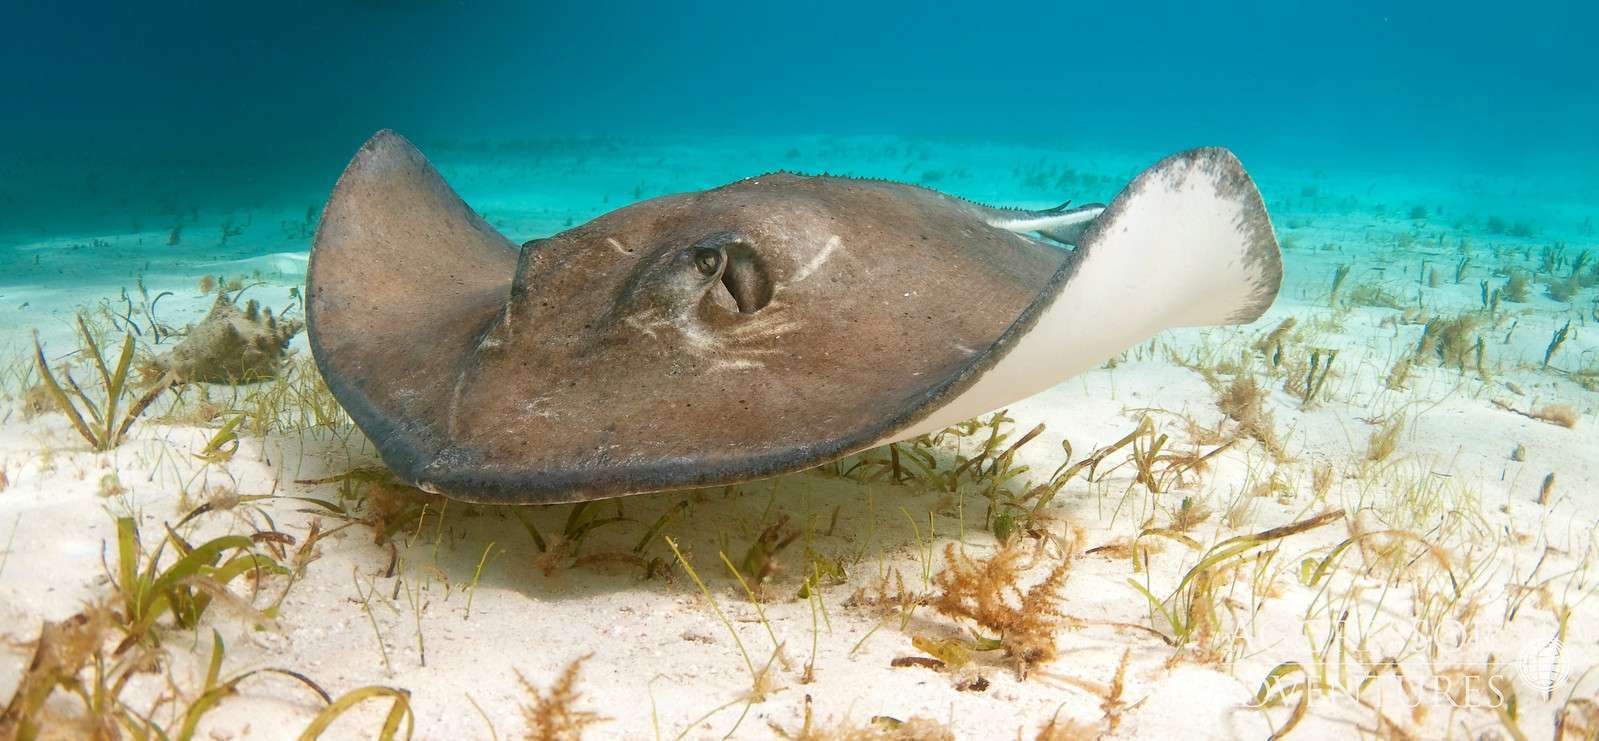 A ray glides over the sandy bottom of the ocean.